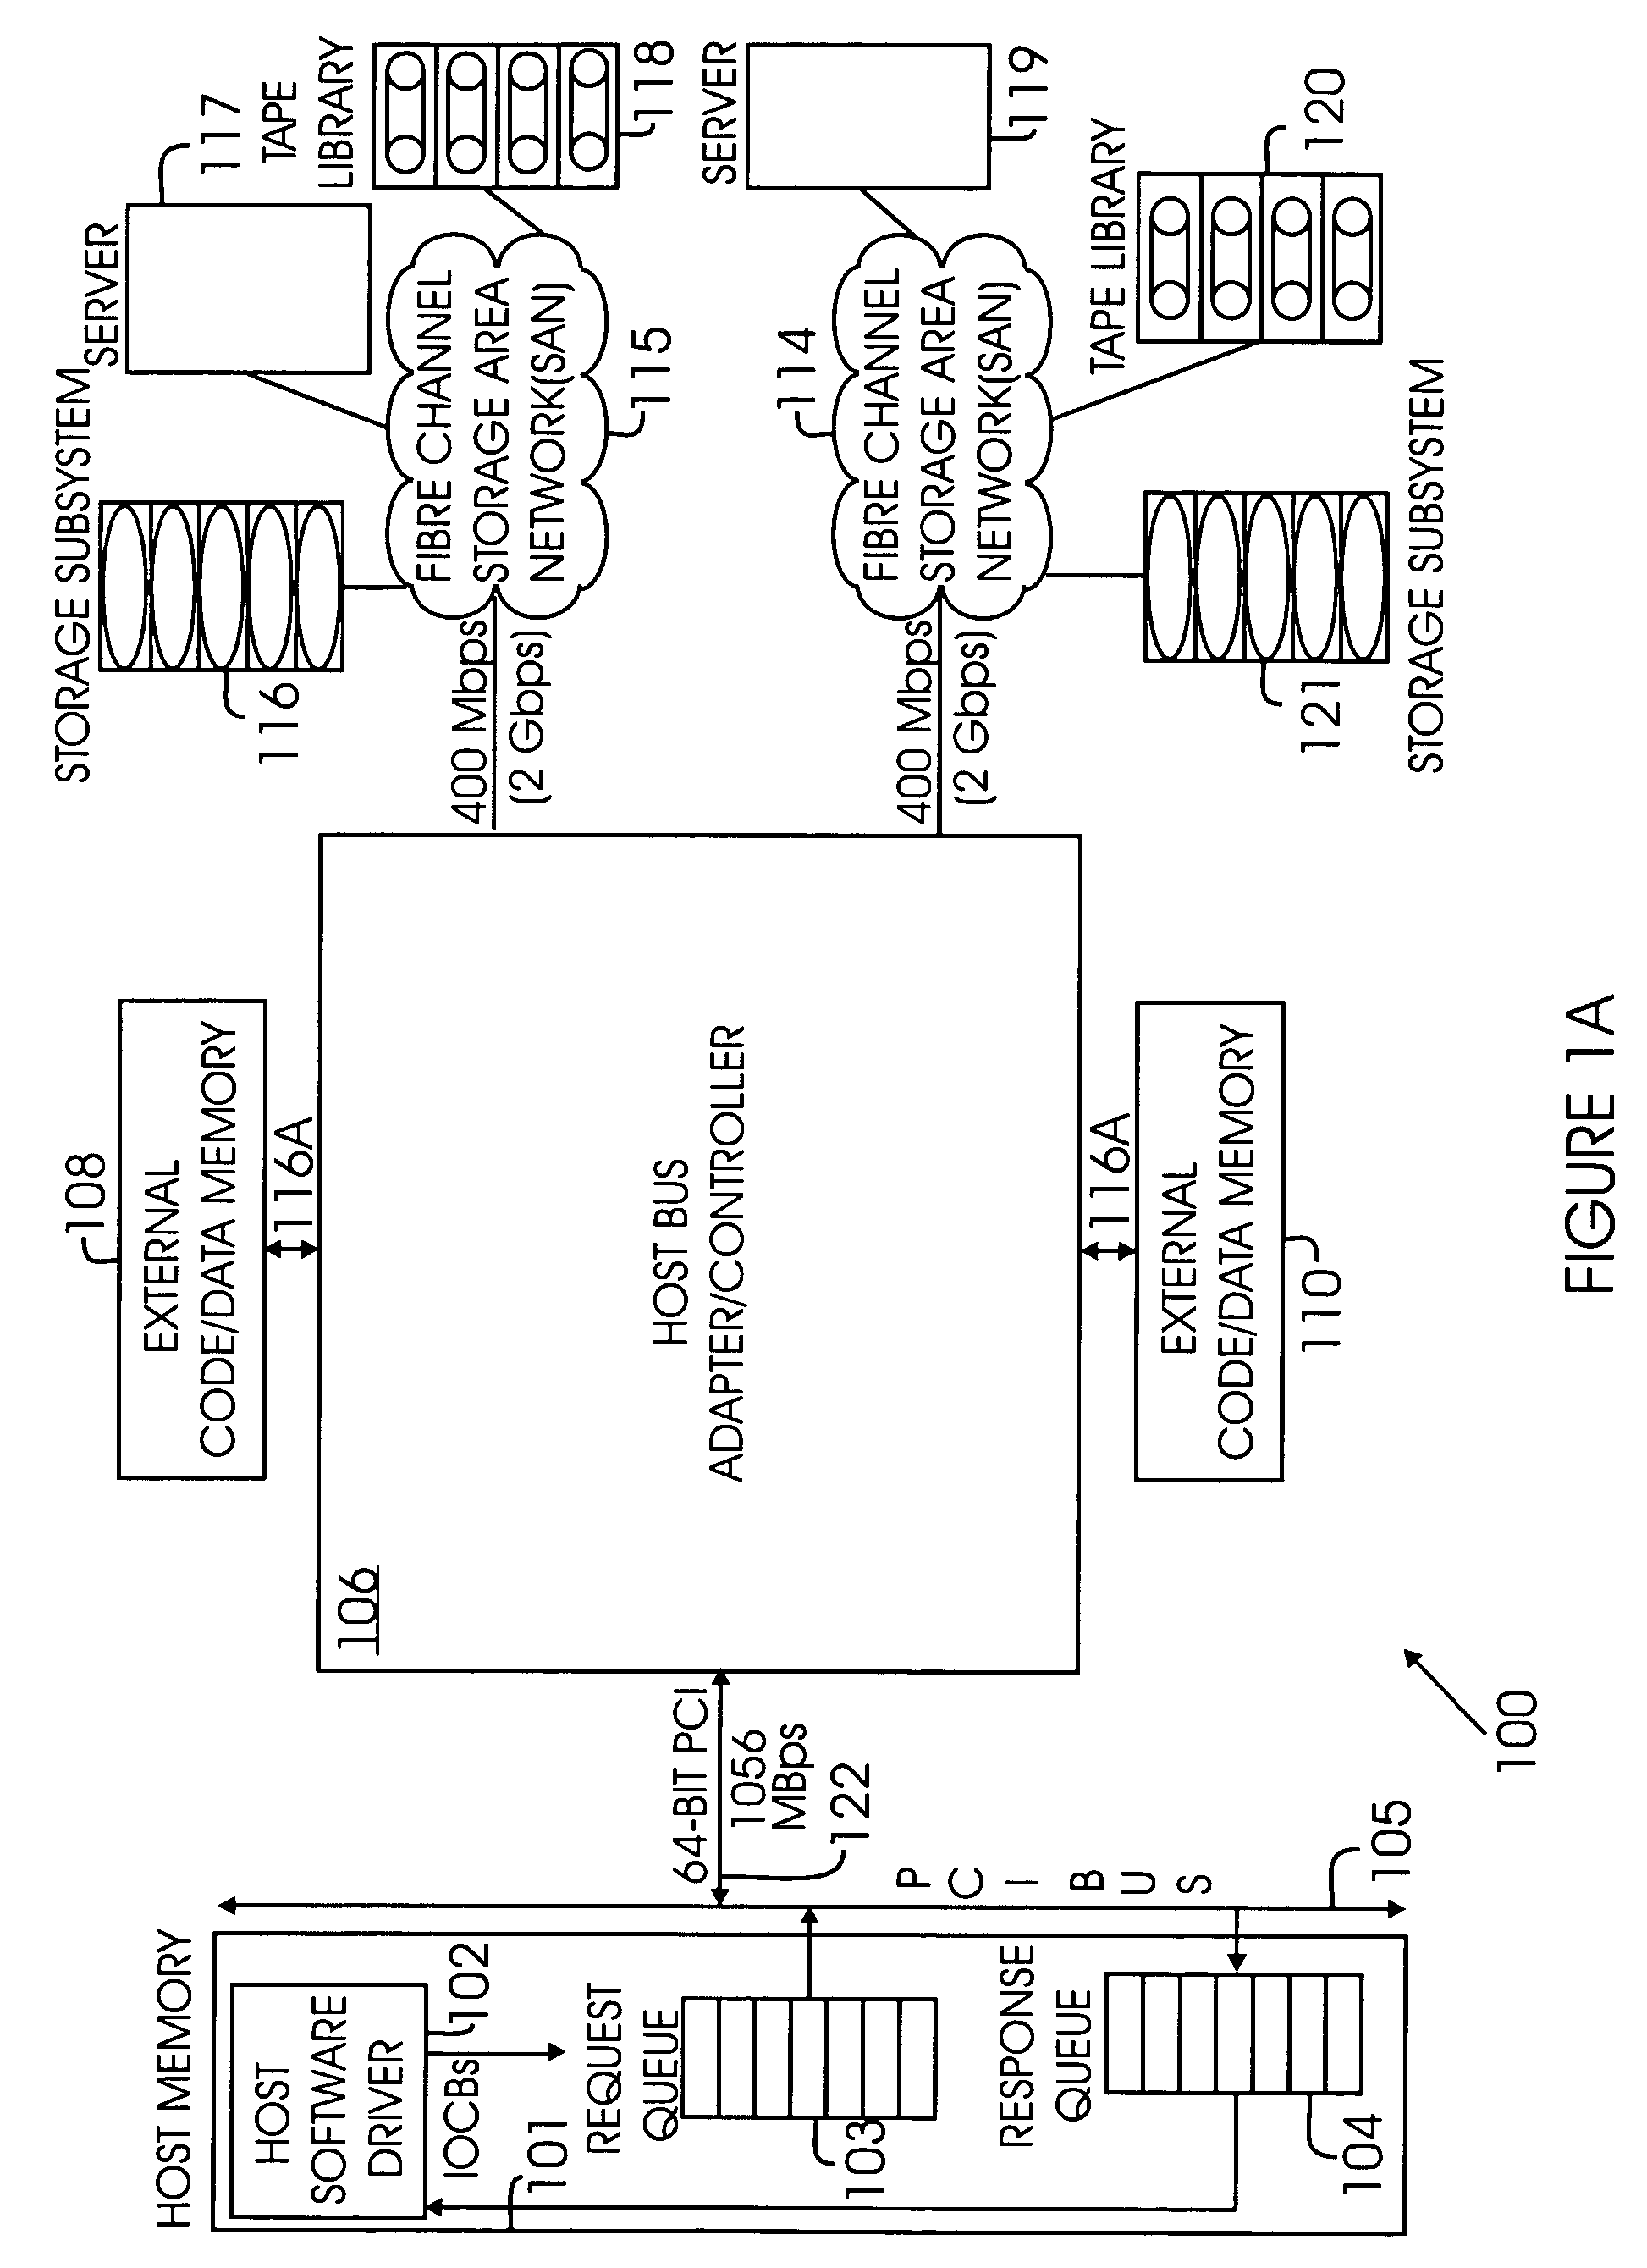 Method and system for optimizing DMA channel selection